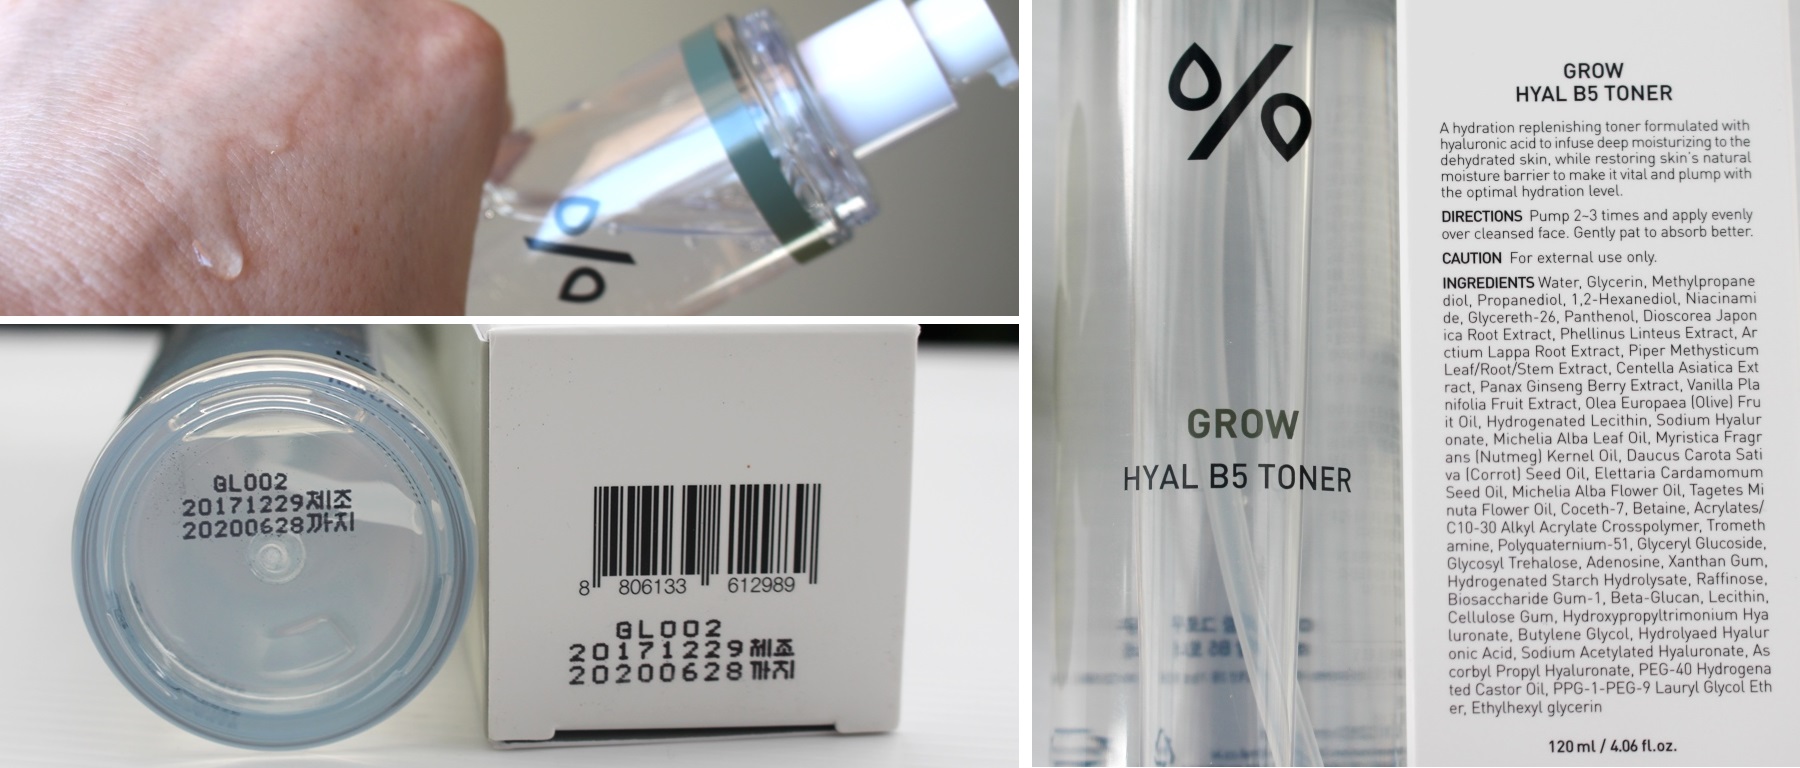 LGH Grow Hyal B5 Toner - Texture, Ingredients and Expiry